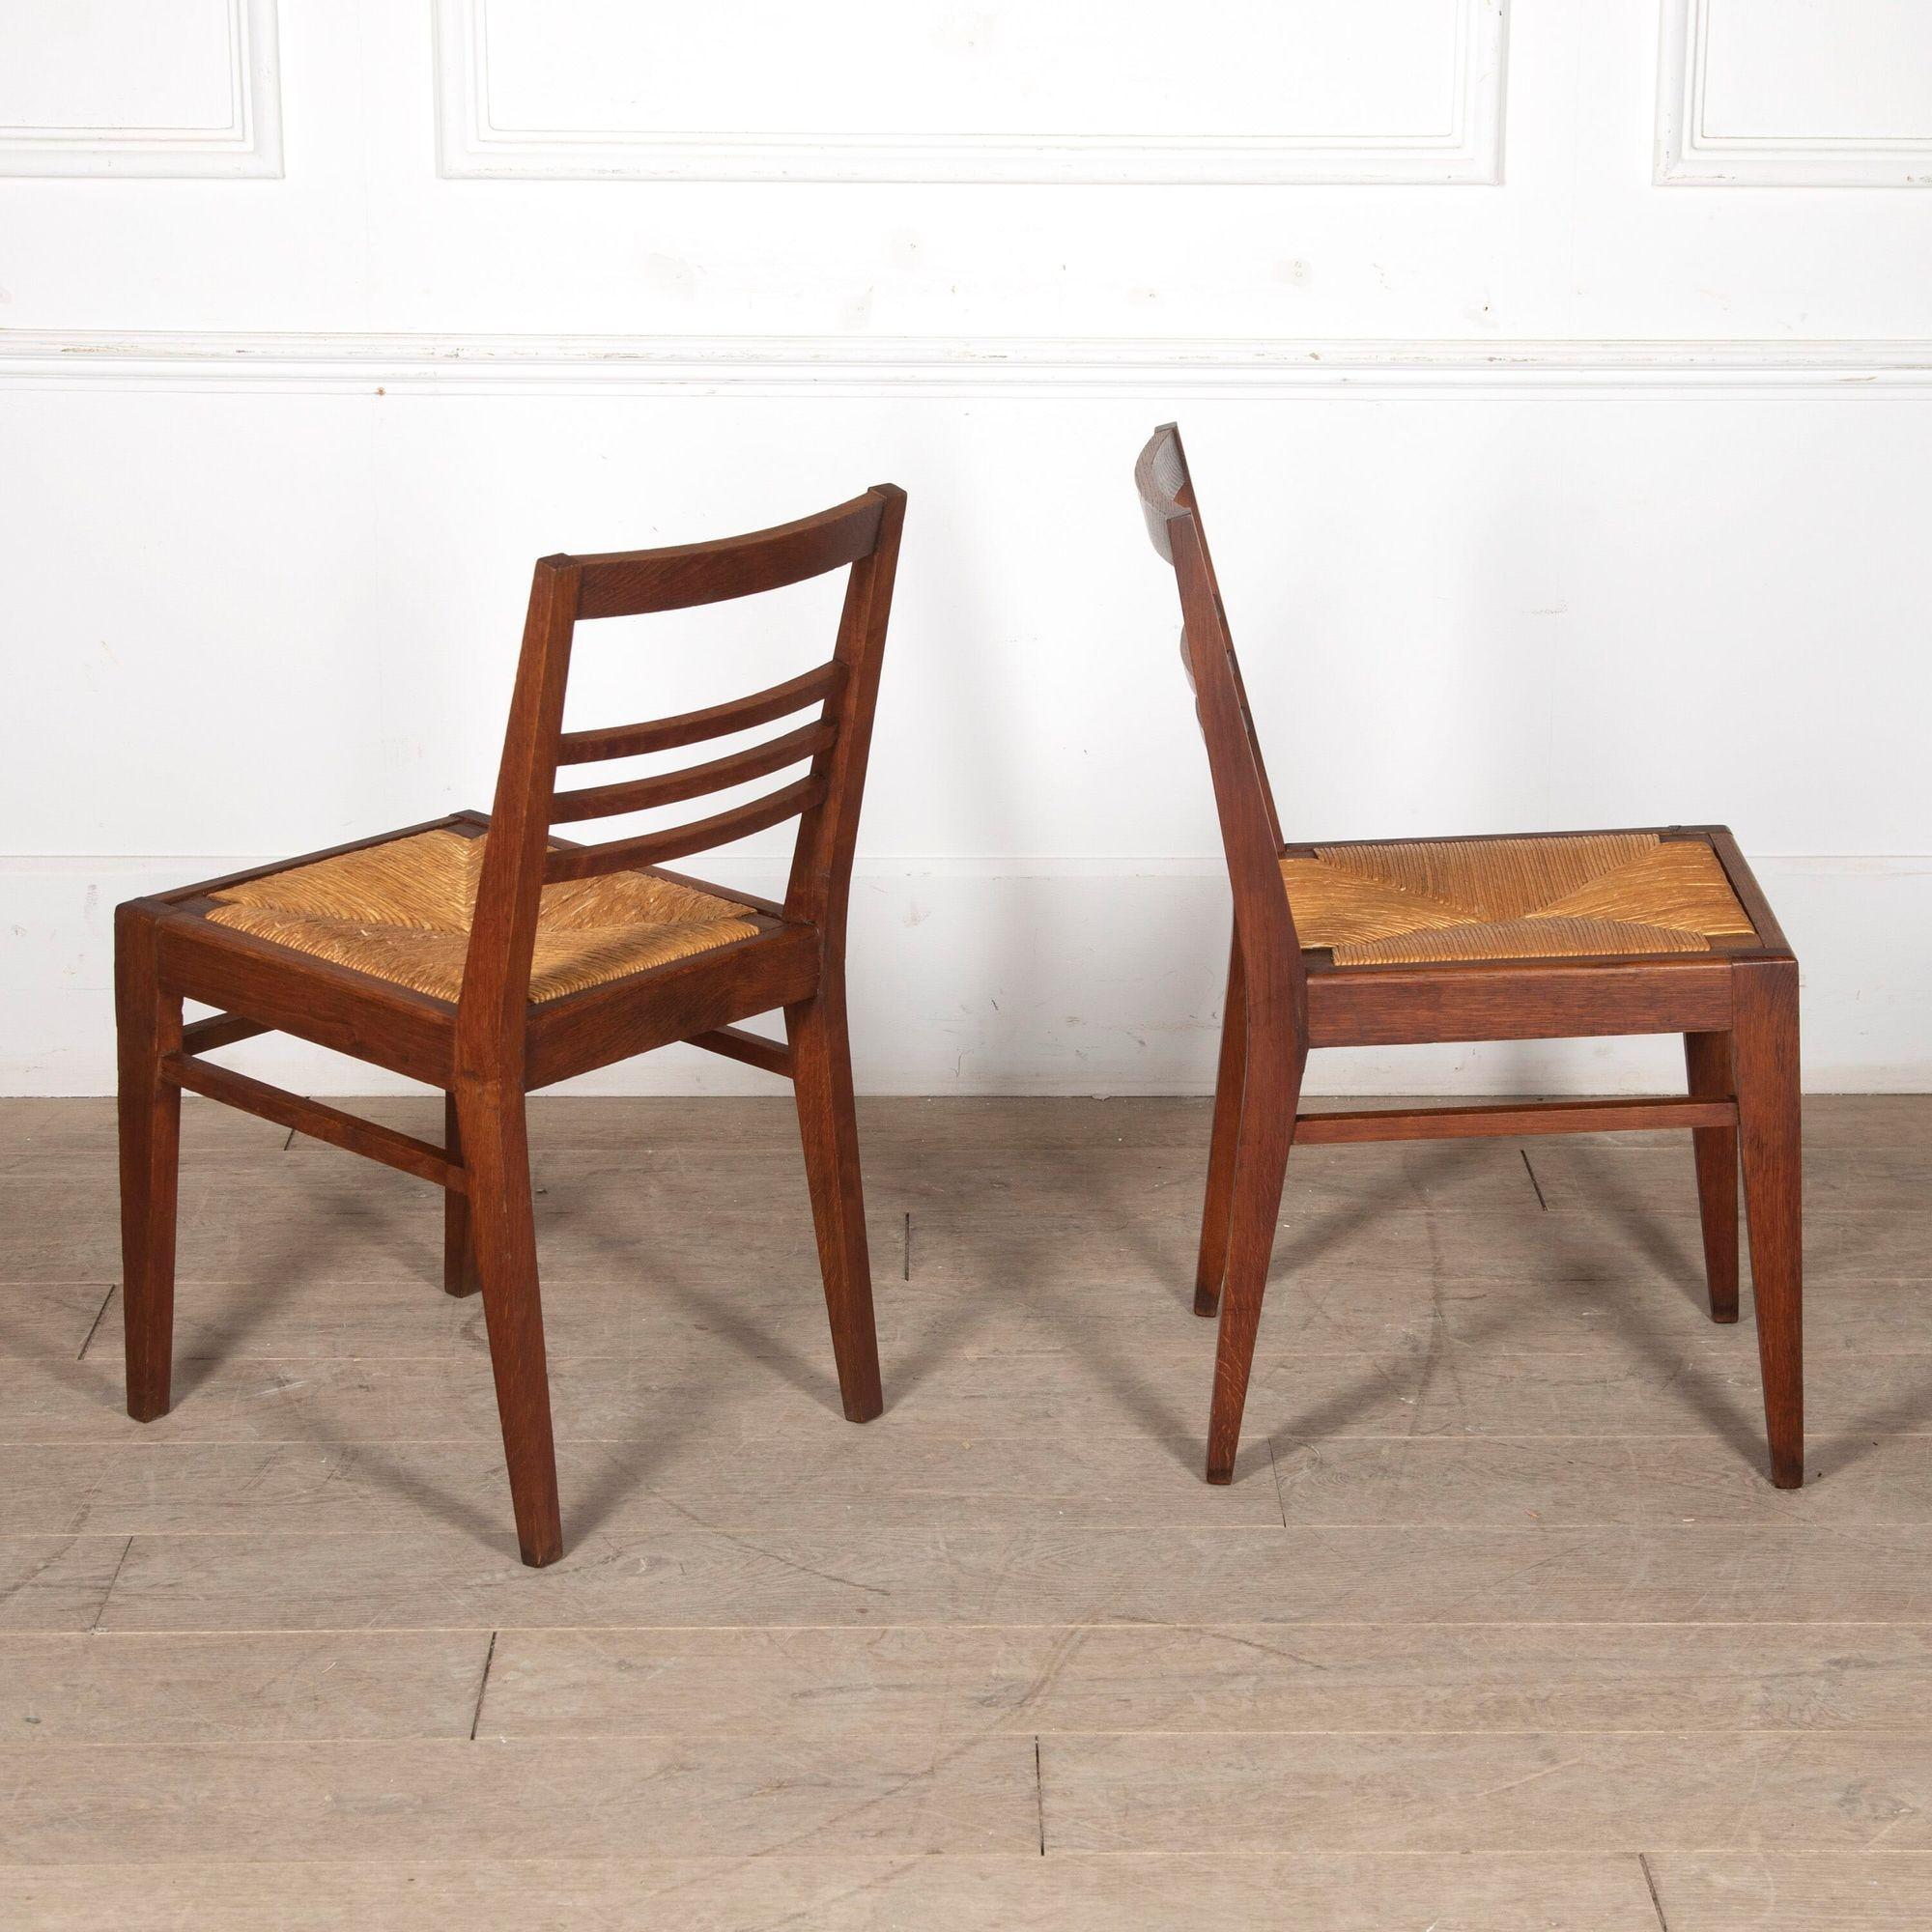 Lovely set of six Mid-Century oak dining chairs with rush drop-in seats by Rene Gabriel.
Circa 1950s.